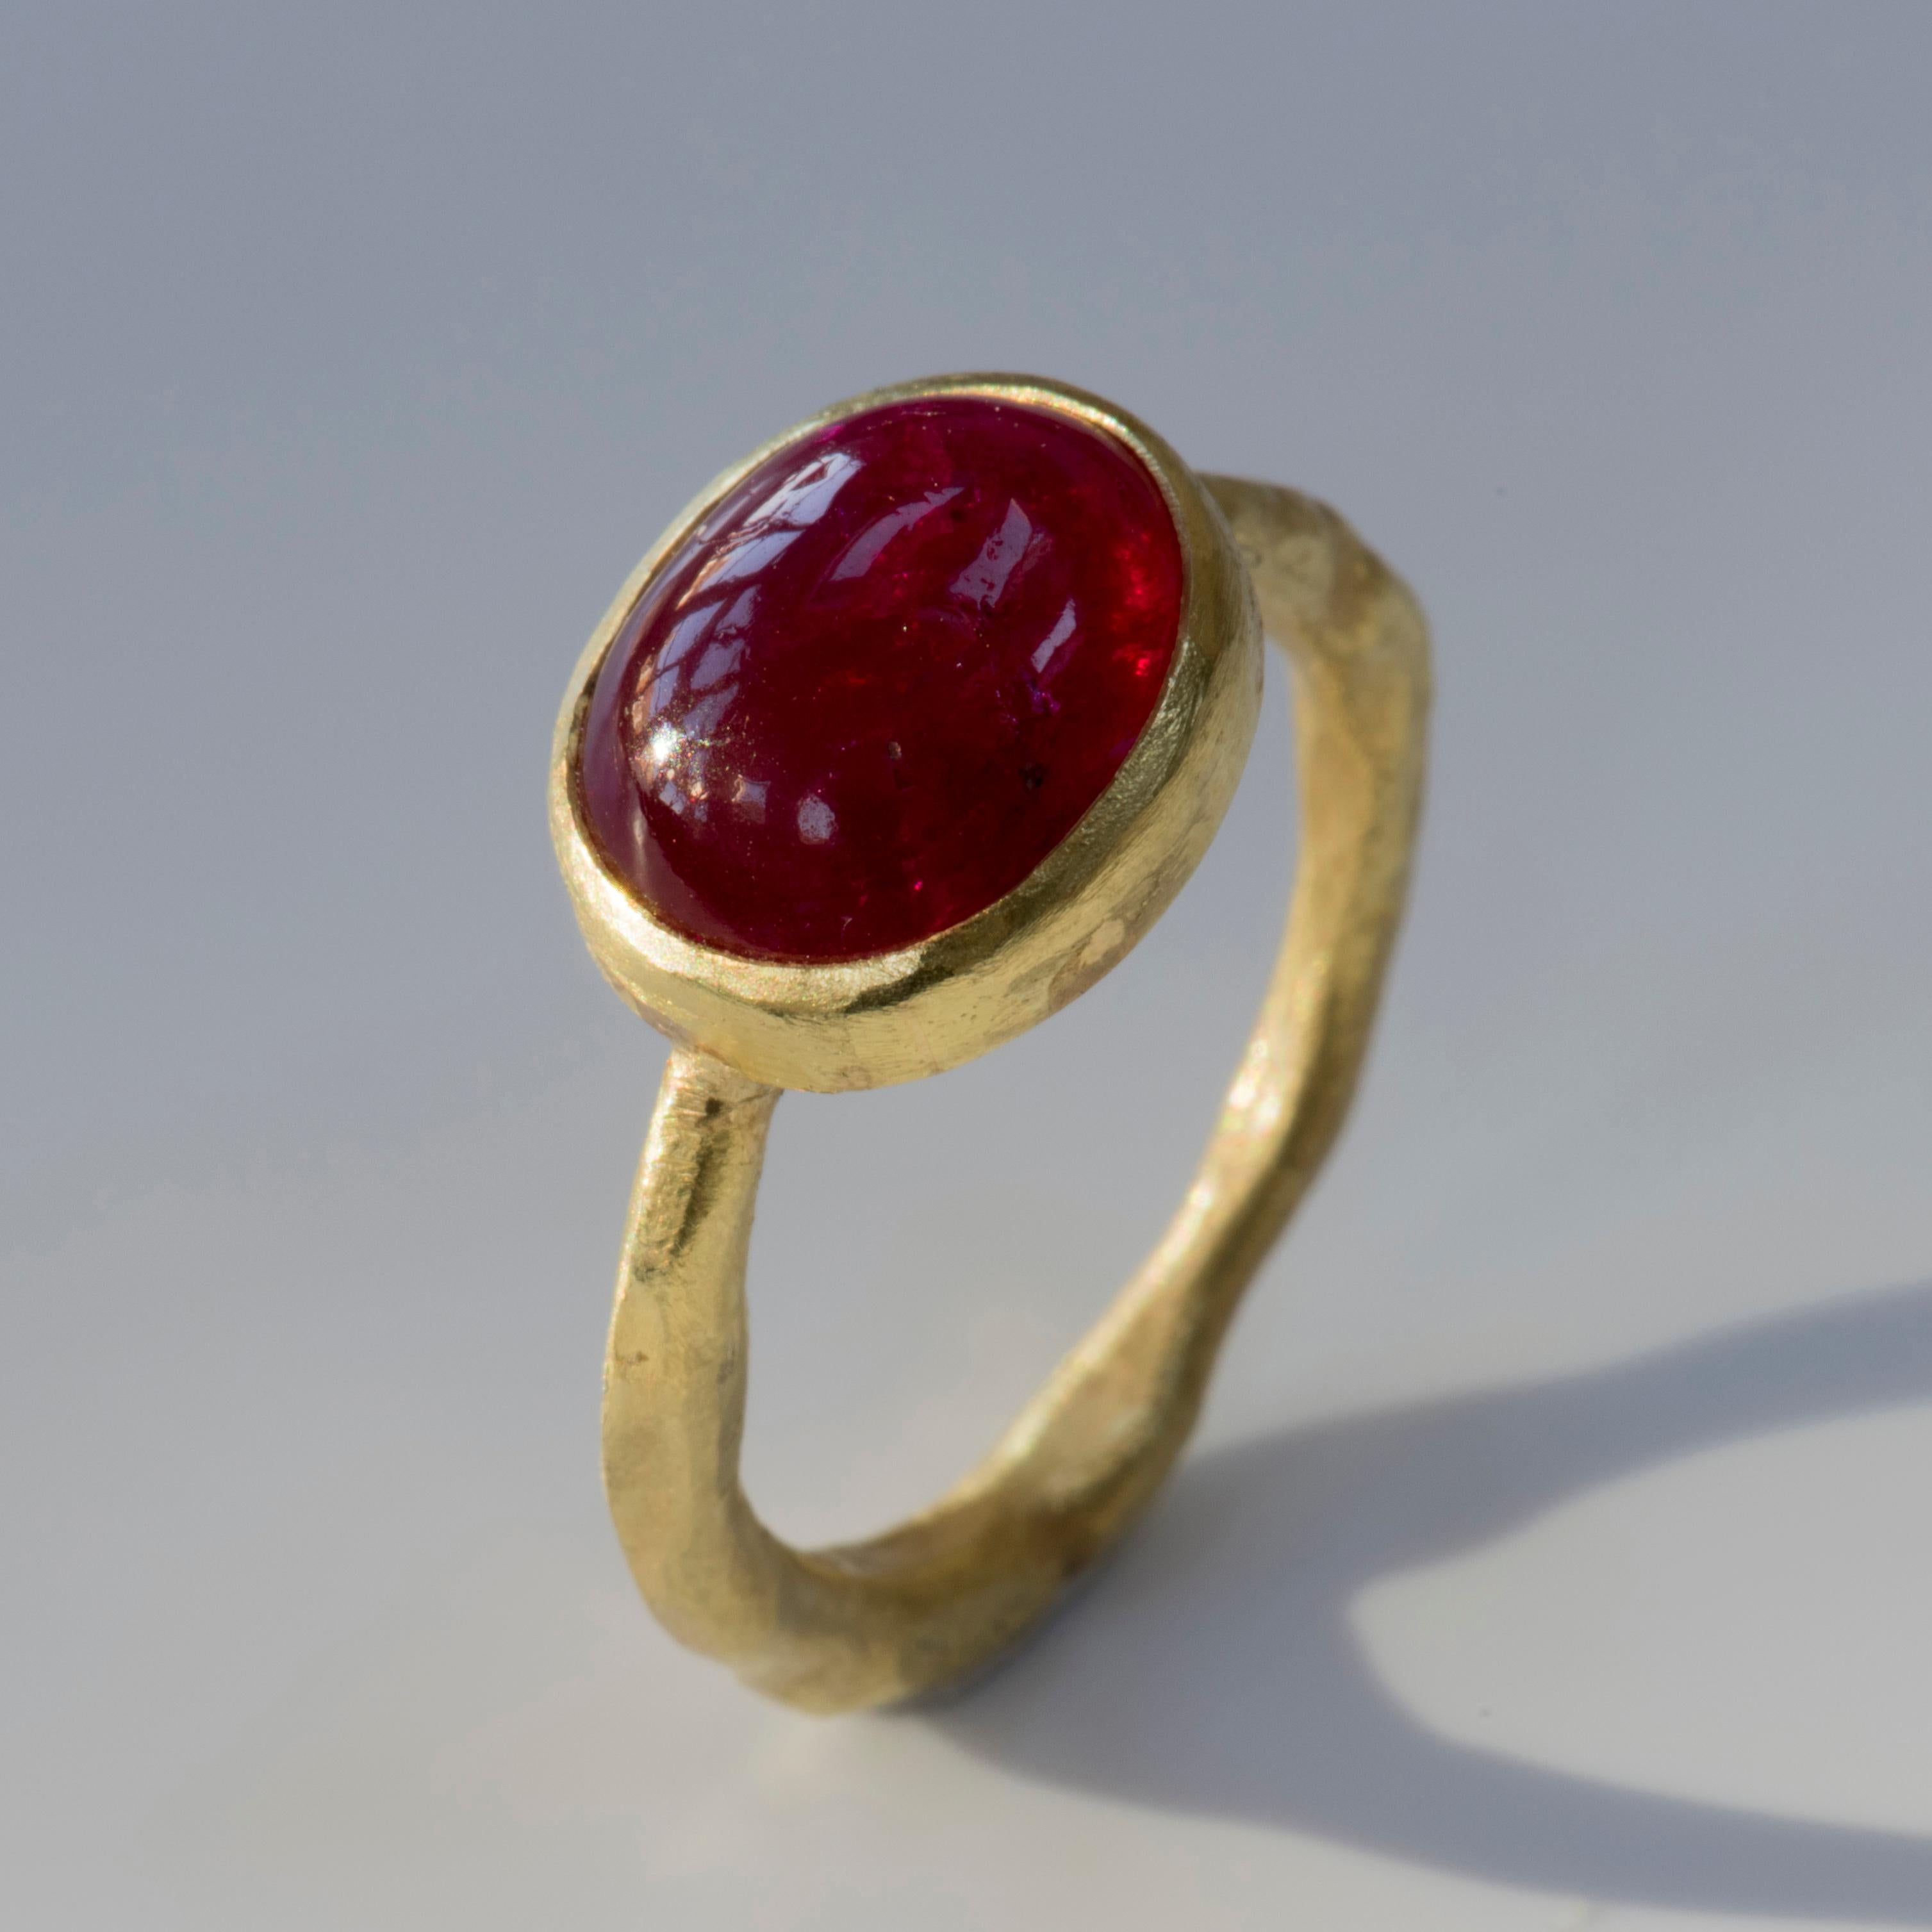 18k yellow gold organic texture ring with oval Cabouchon Ruby, 12x10mm, from Kenya. 
Handmade by Disa Allsopp in her London studio, this ring showcases a stunning example of cabouchon cut ruby, with its warm deep glow.

Disa is known for her